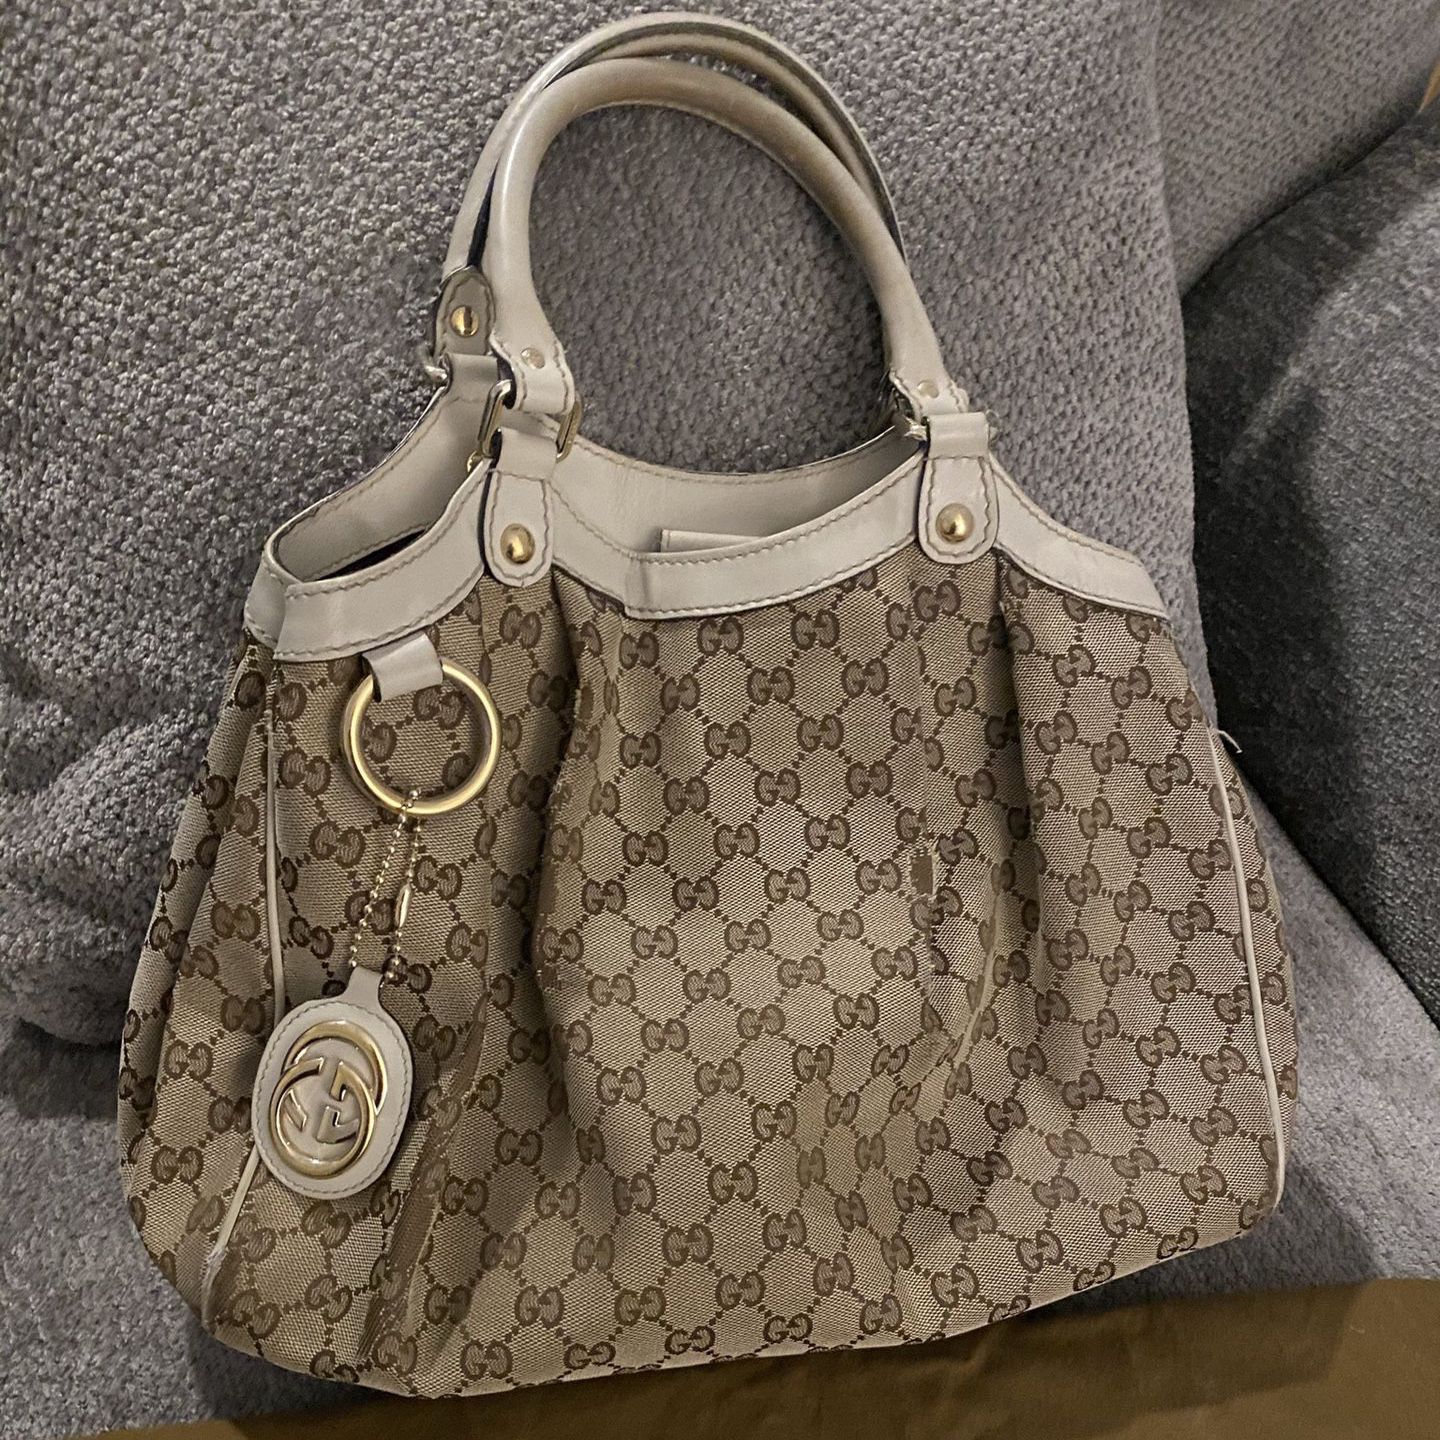 Authentic Gucci Sukey Tote bag with dust bag